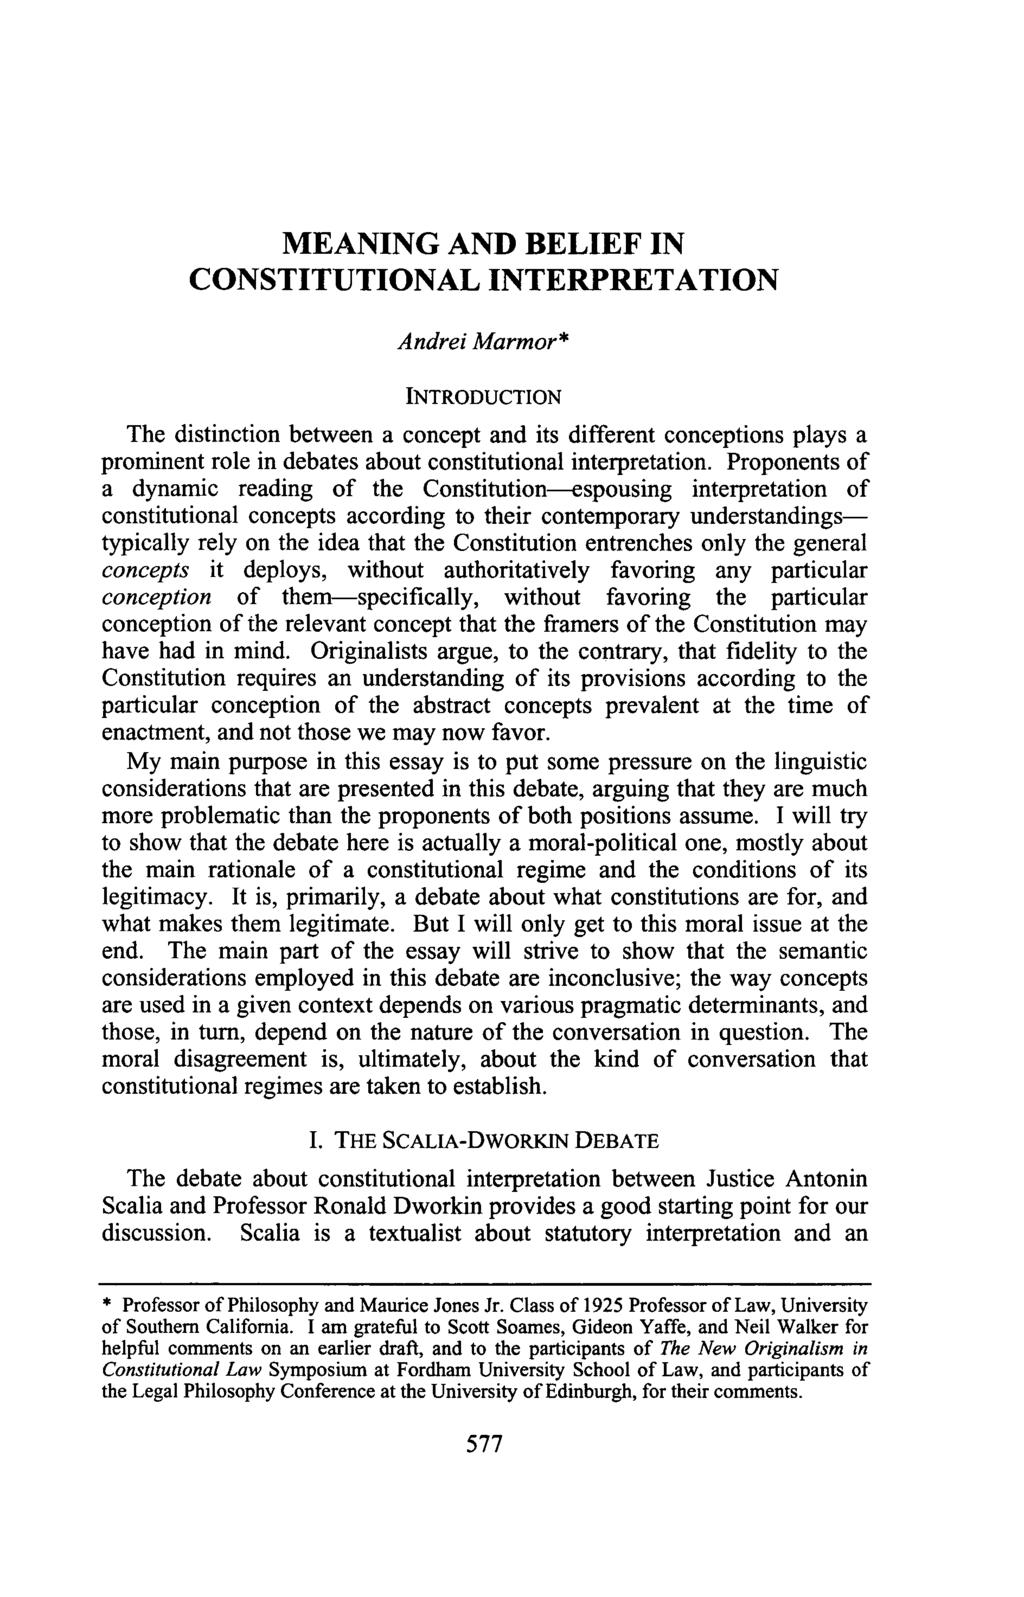 MEANING AND BELIEF IN CONSTITUTIONAL INTERPRETATION Andrei Marmor* INTRODUCTION The distinction between a concept and its different conceptions plays a prominent role in debates about constitutional